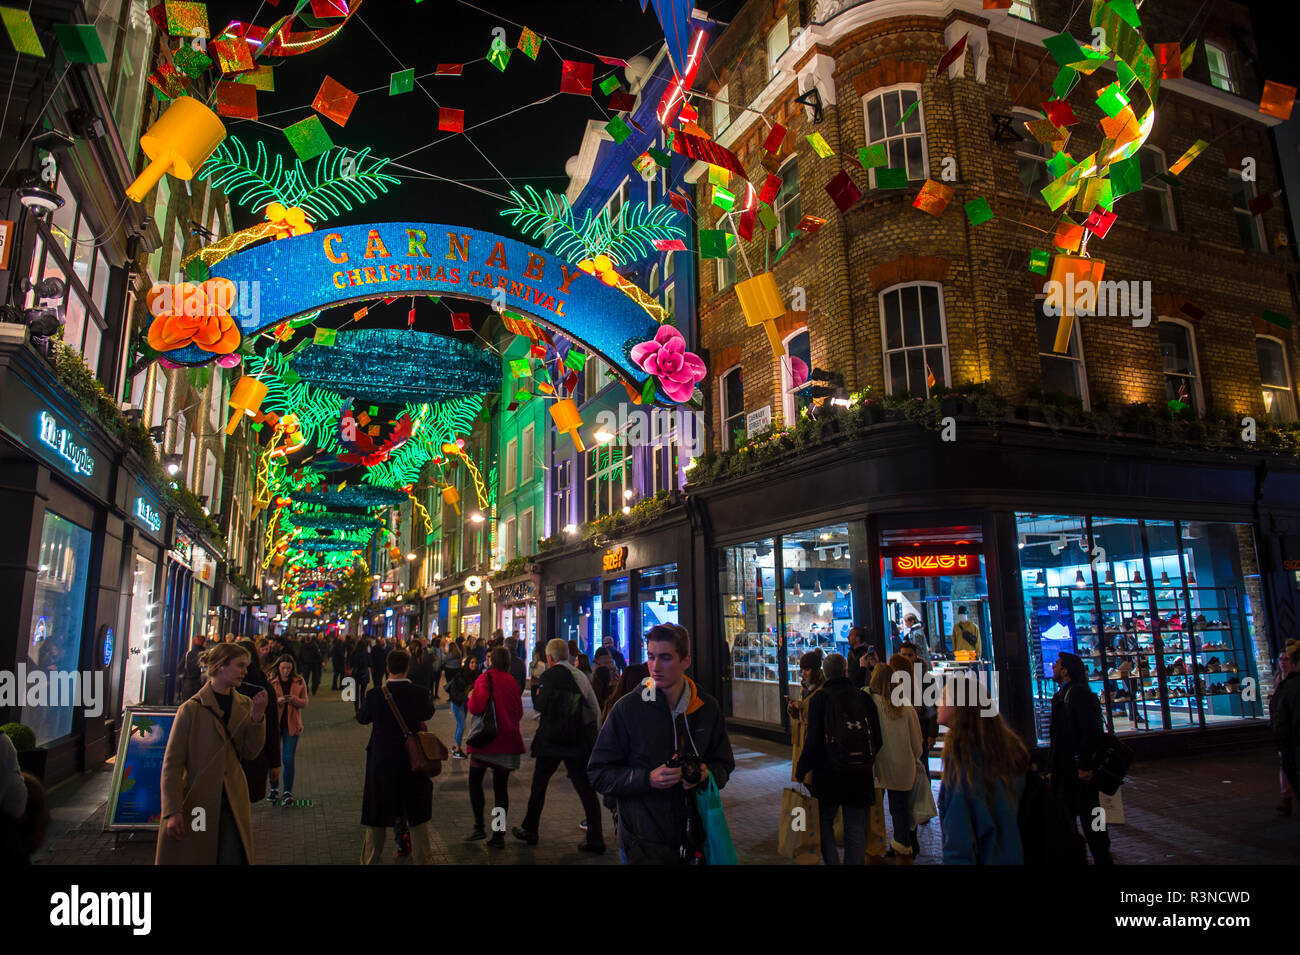 LONDON - CIRCA DECEMBER, 2017: Shoppers crowd the retail district of Carnaby Street, decorated for the holidays with a ‘Christmas Carnival’ theme. Stock Photo